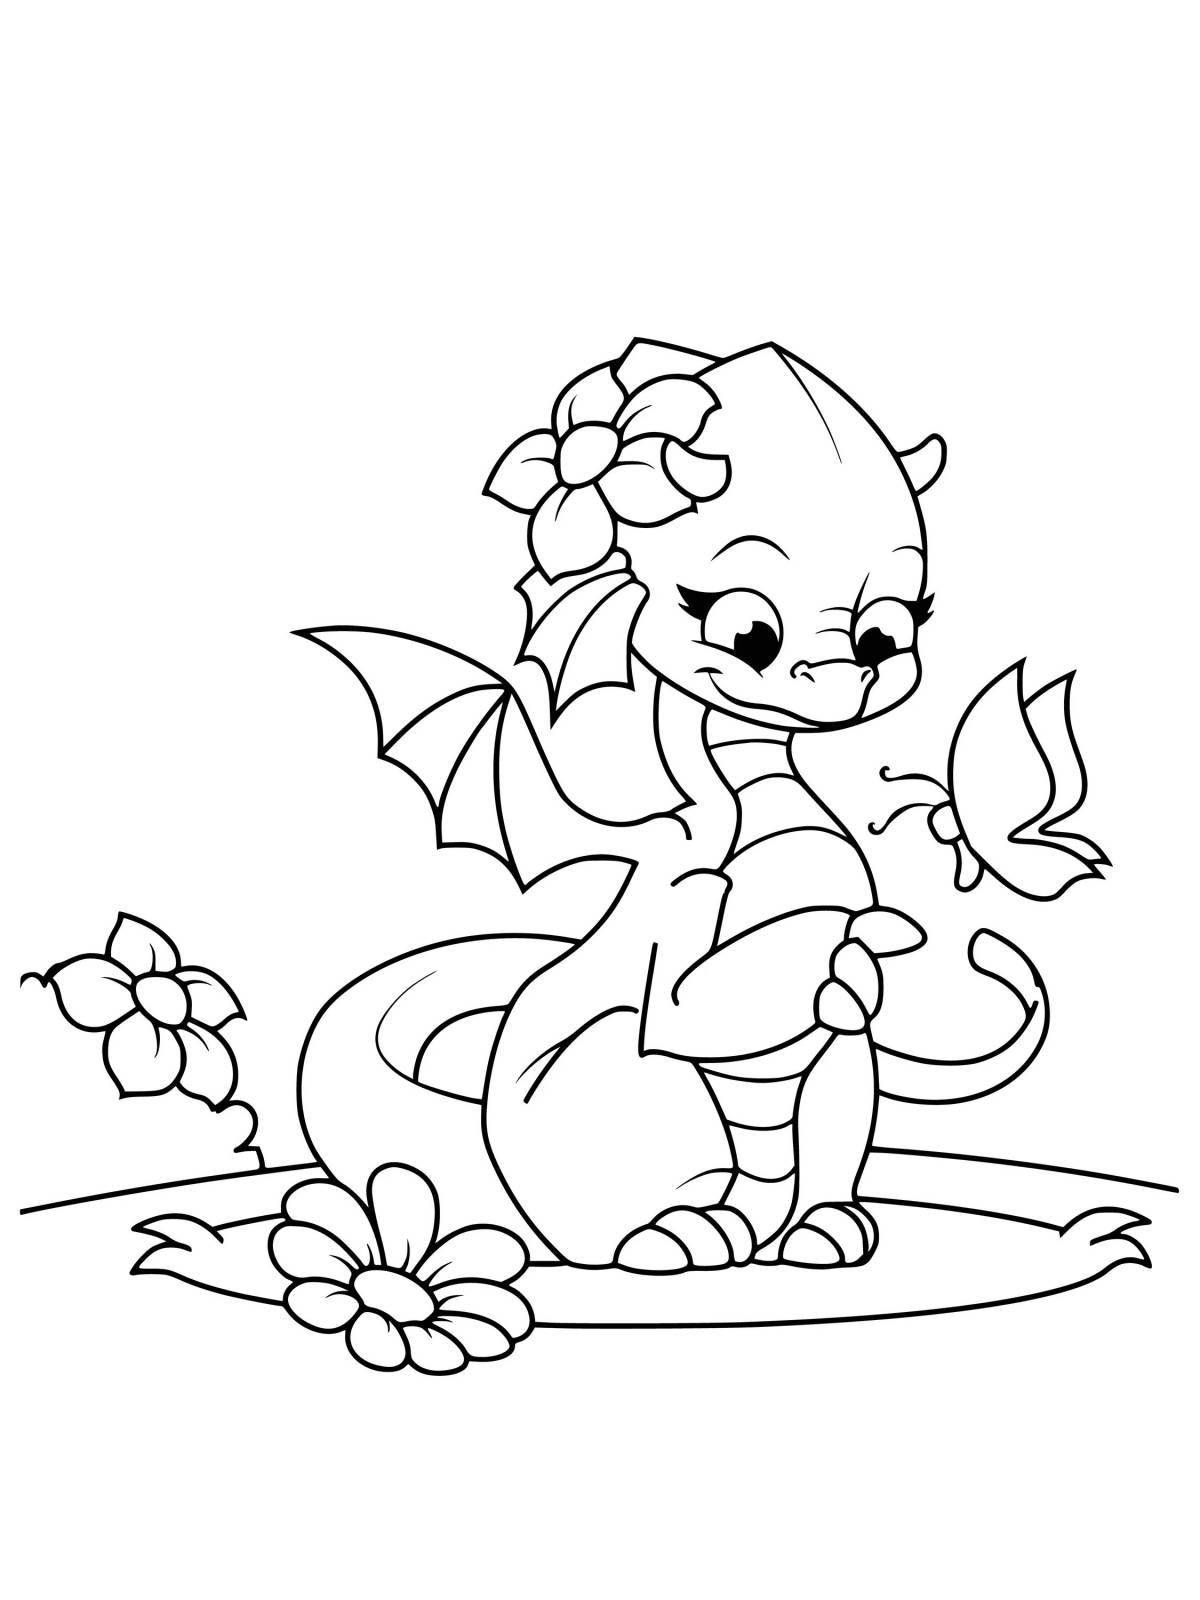 Bright year of the dragon coloring book